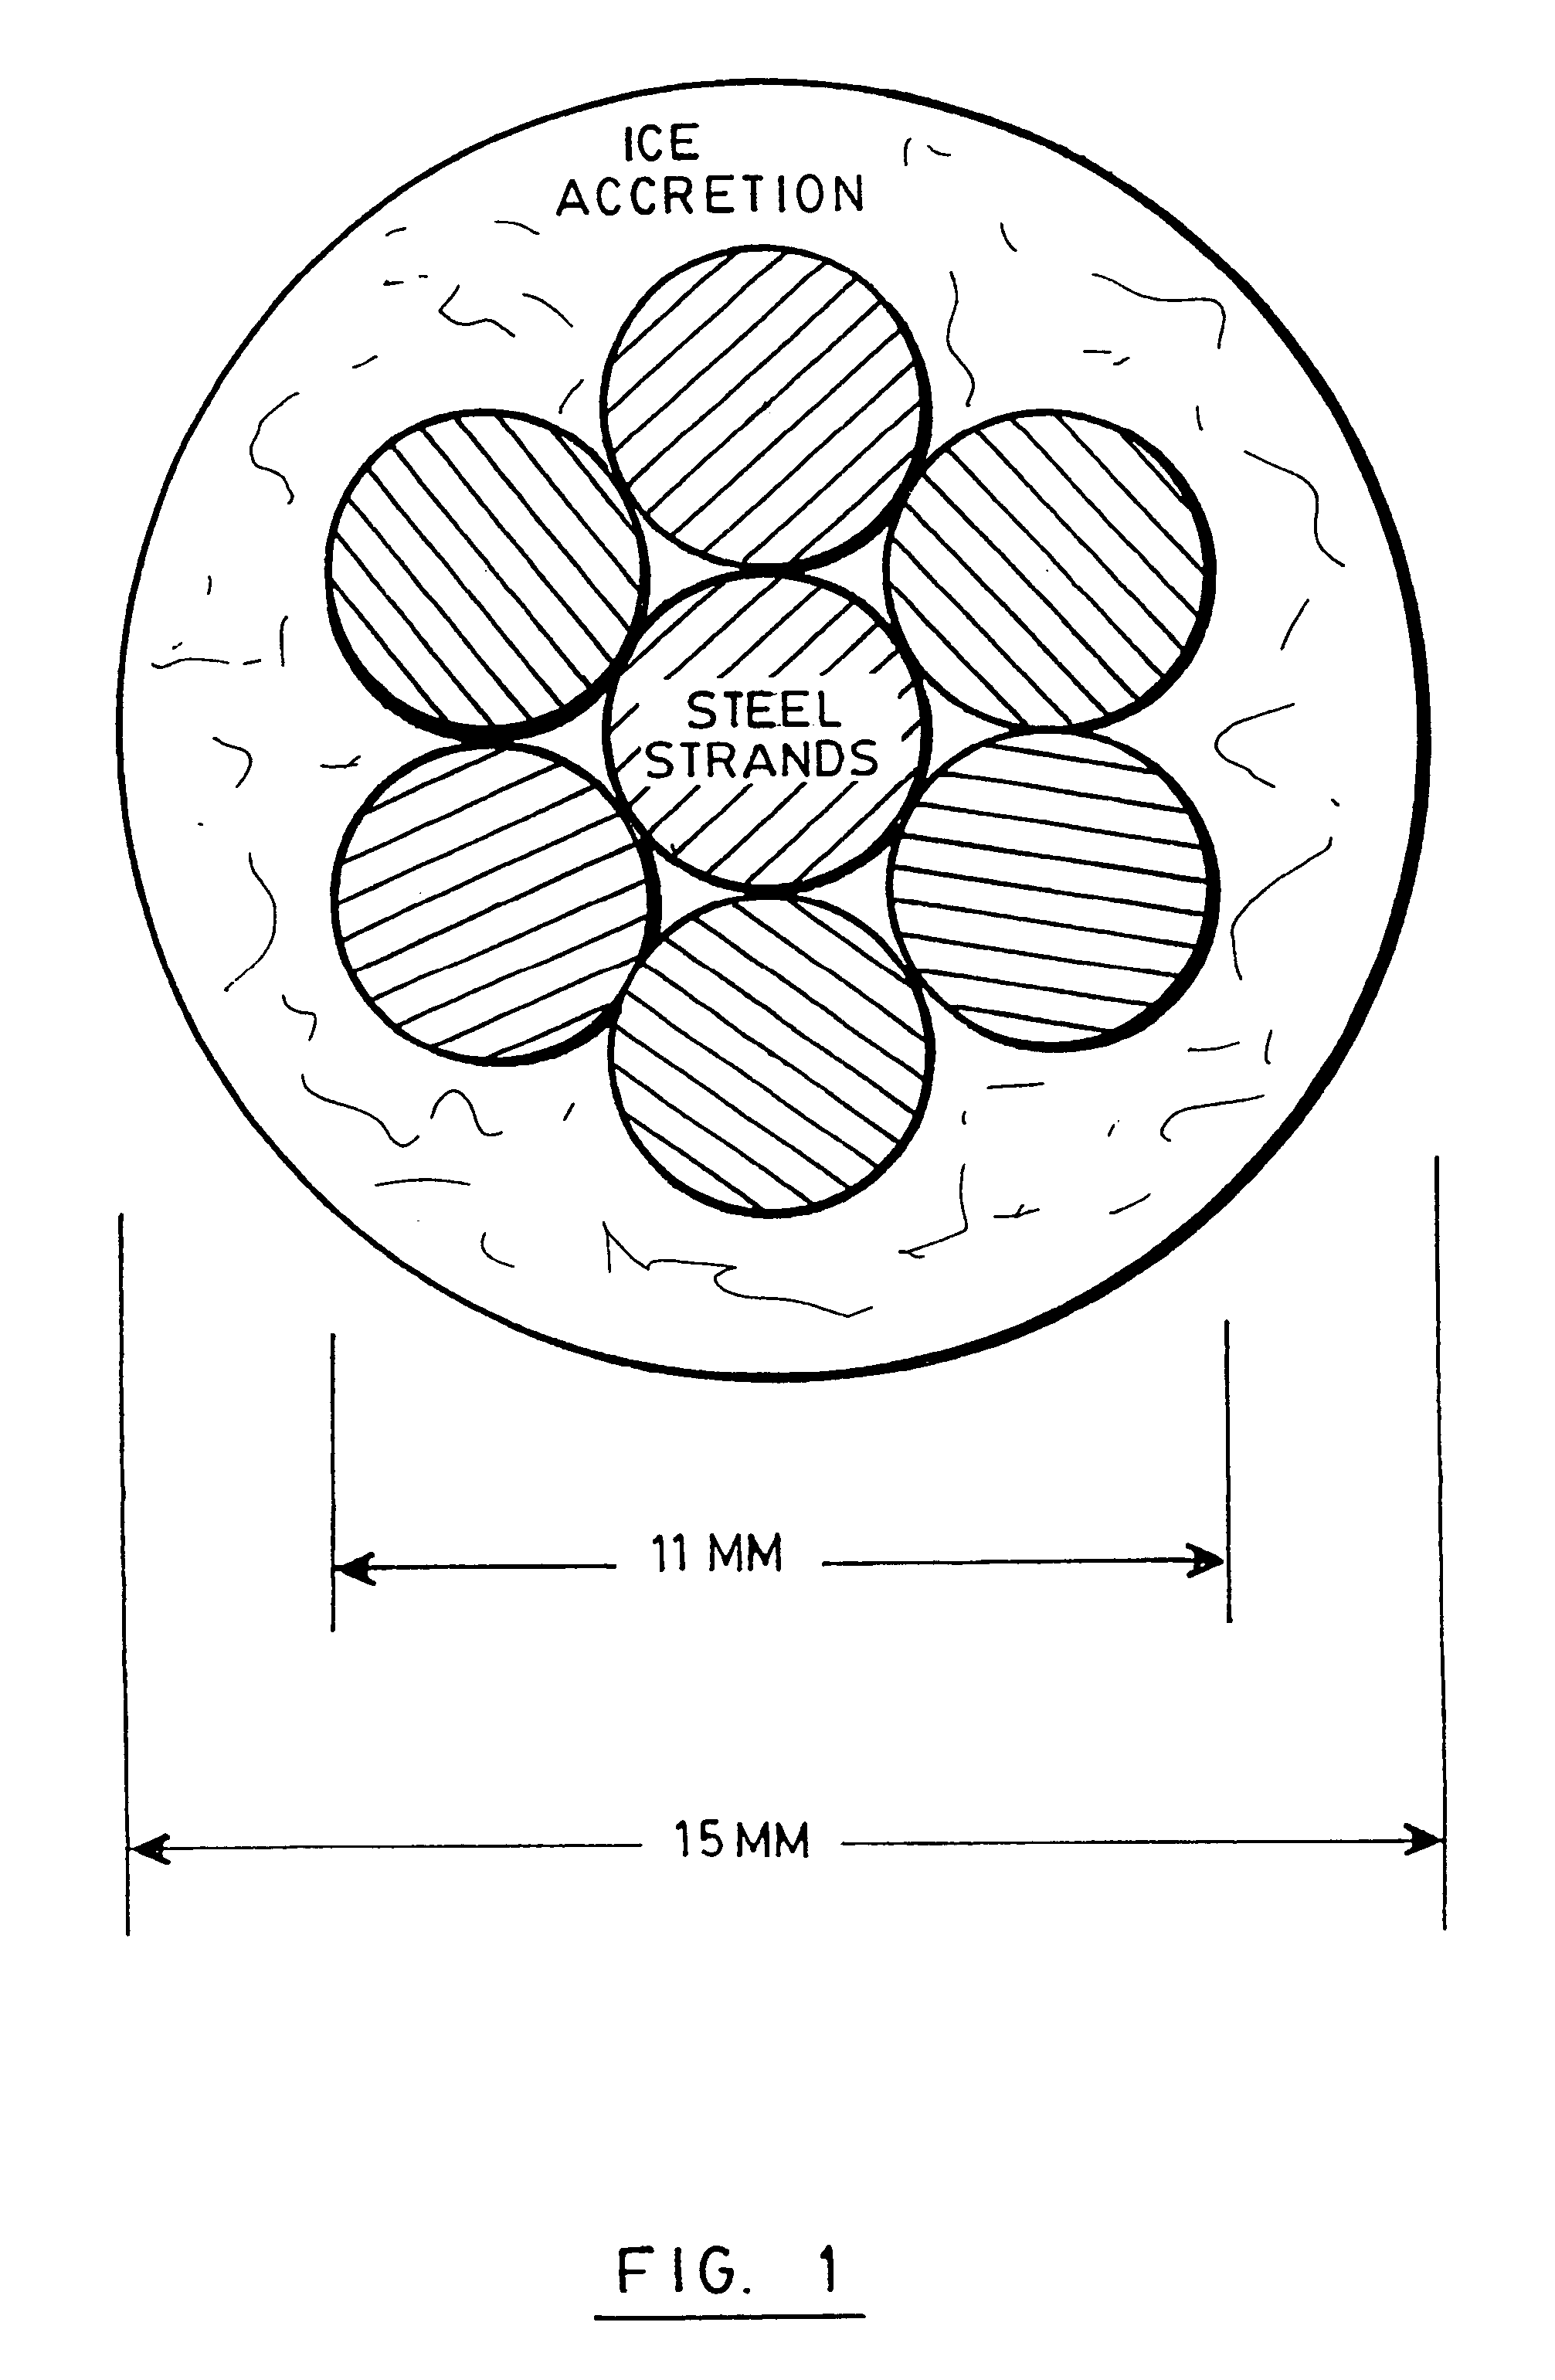 Method and apparatus for breaking ice accretions on an aerial cable